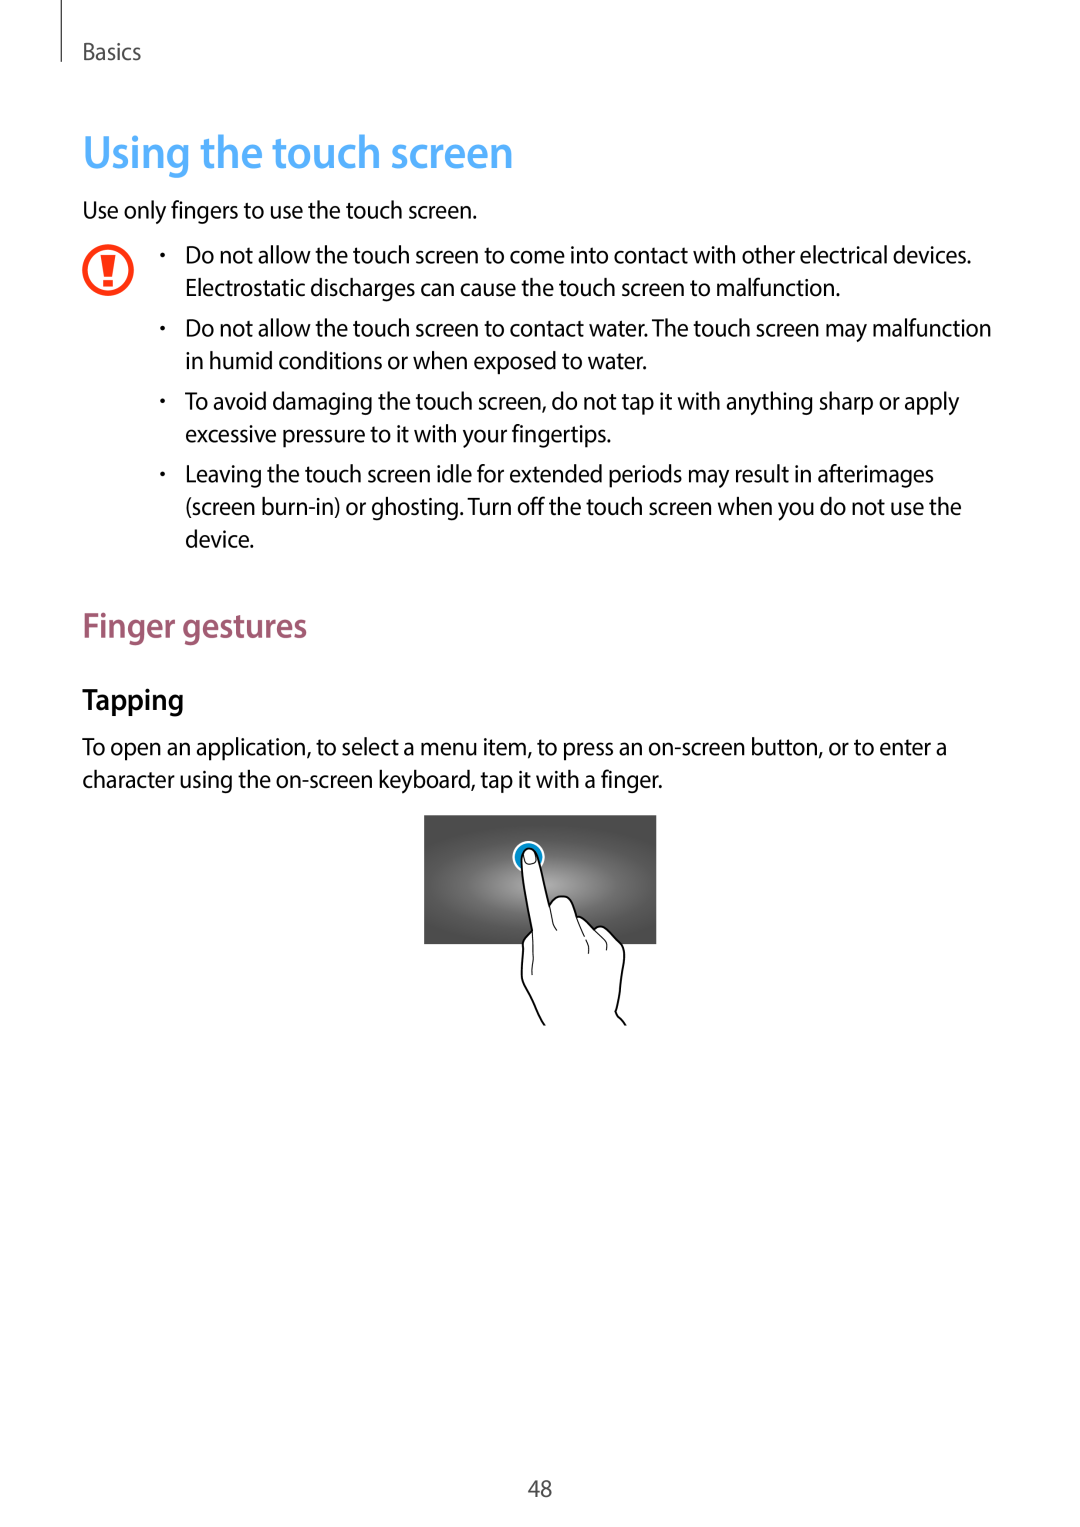 Samsung EK-GC100 user manual Using the touch screen, Finger gestures, Tapping, Basics 